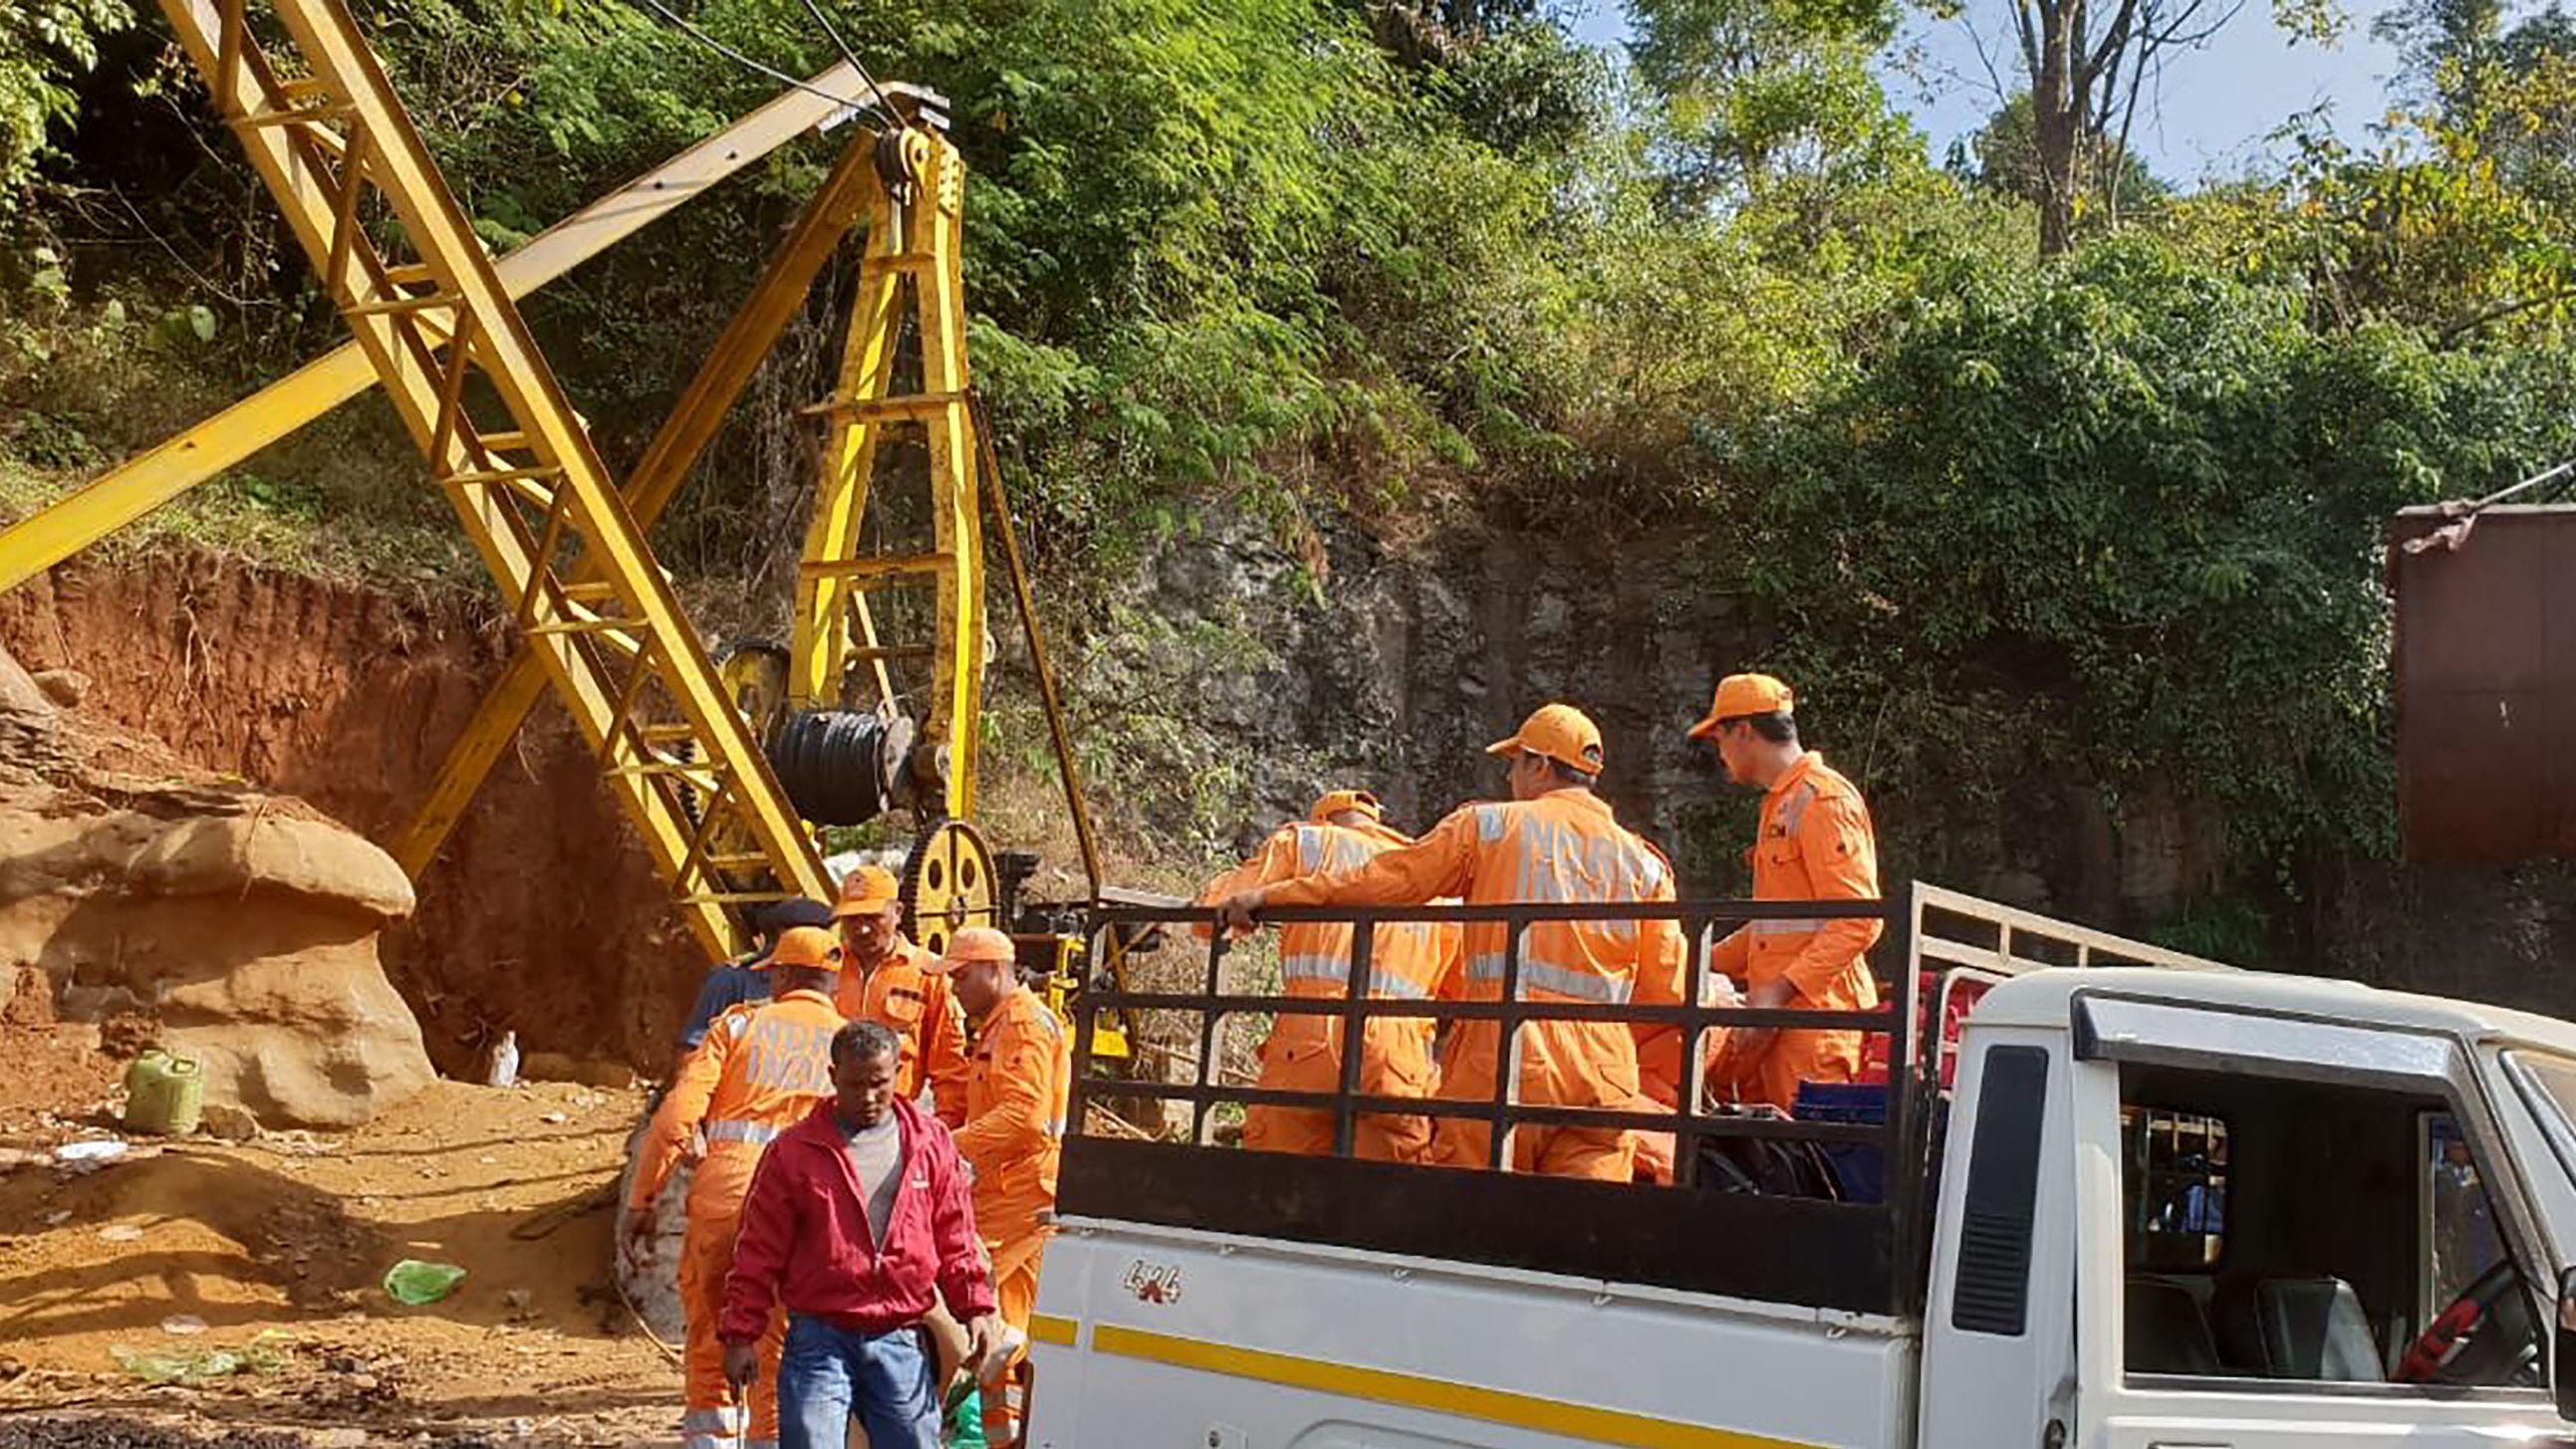 The 13 miners are believed to be stuck 300 feet deep in the Meghalaya mine, an official says.